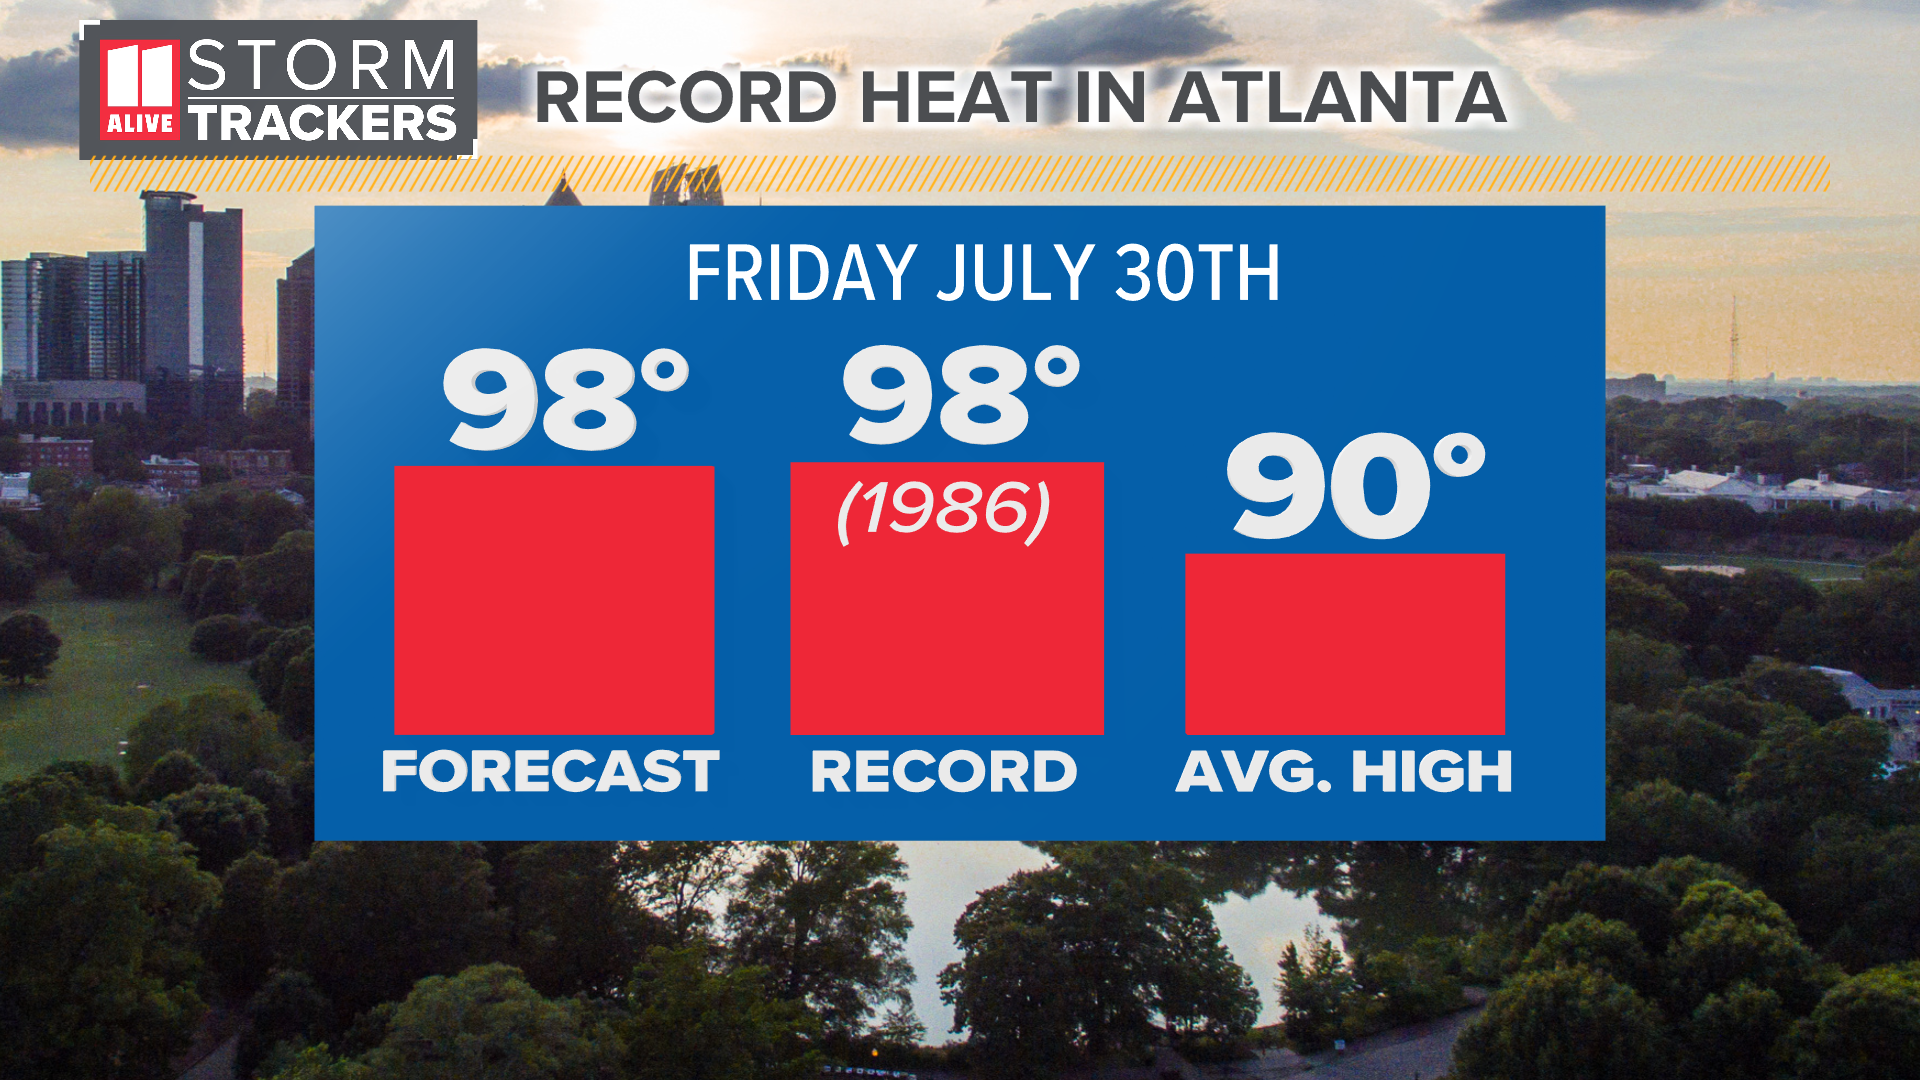 The forecast high is 98, which would tie the record from 1986.